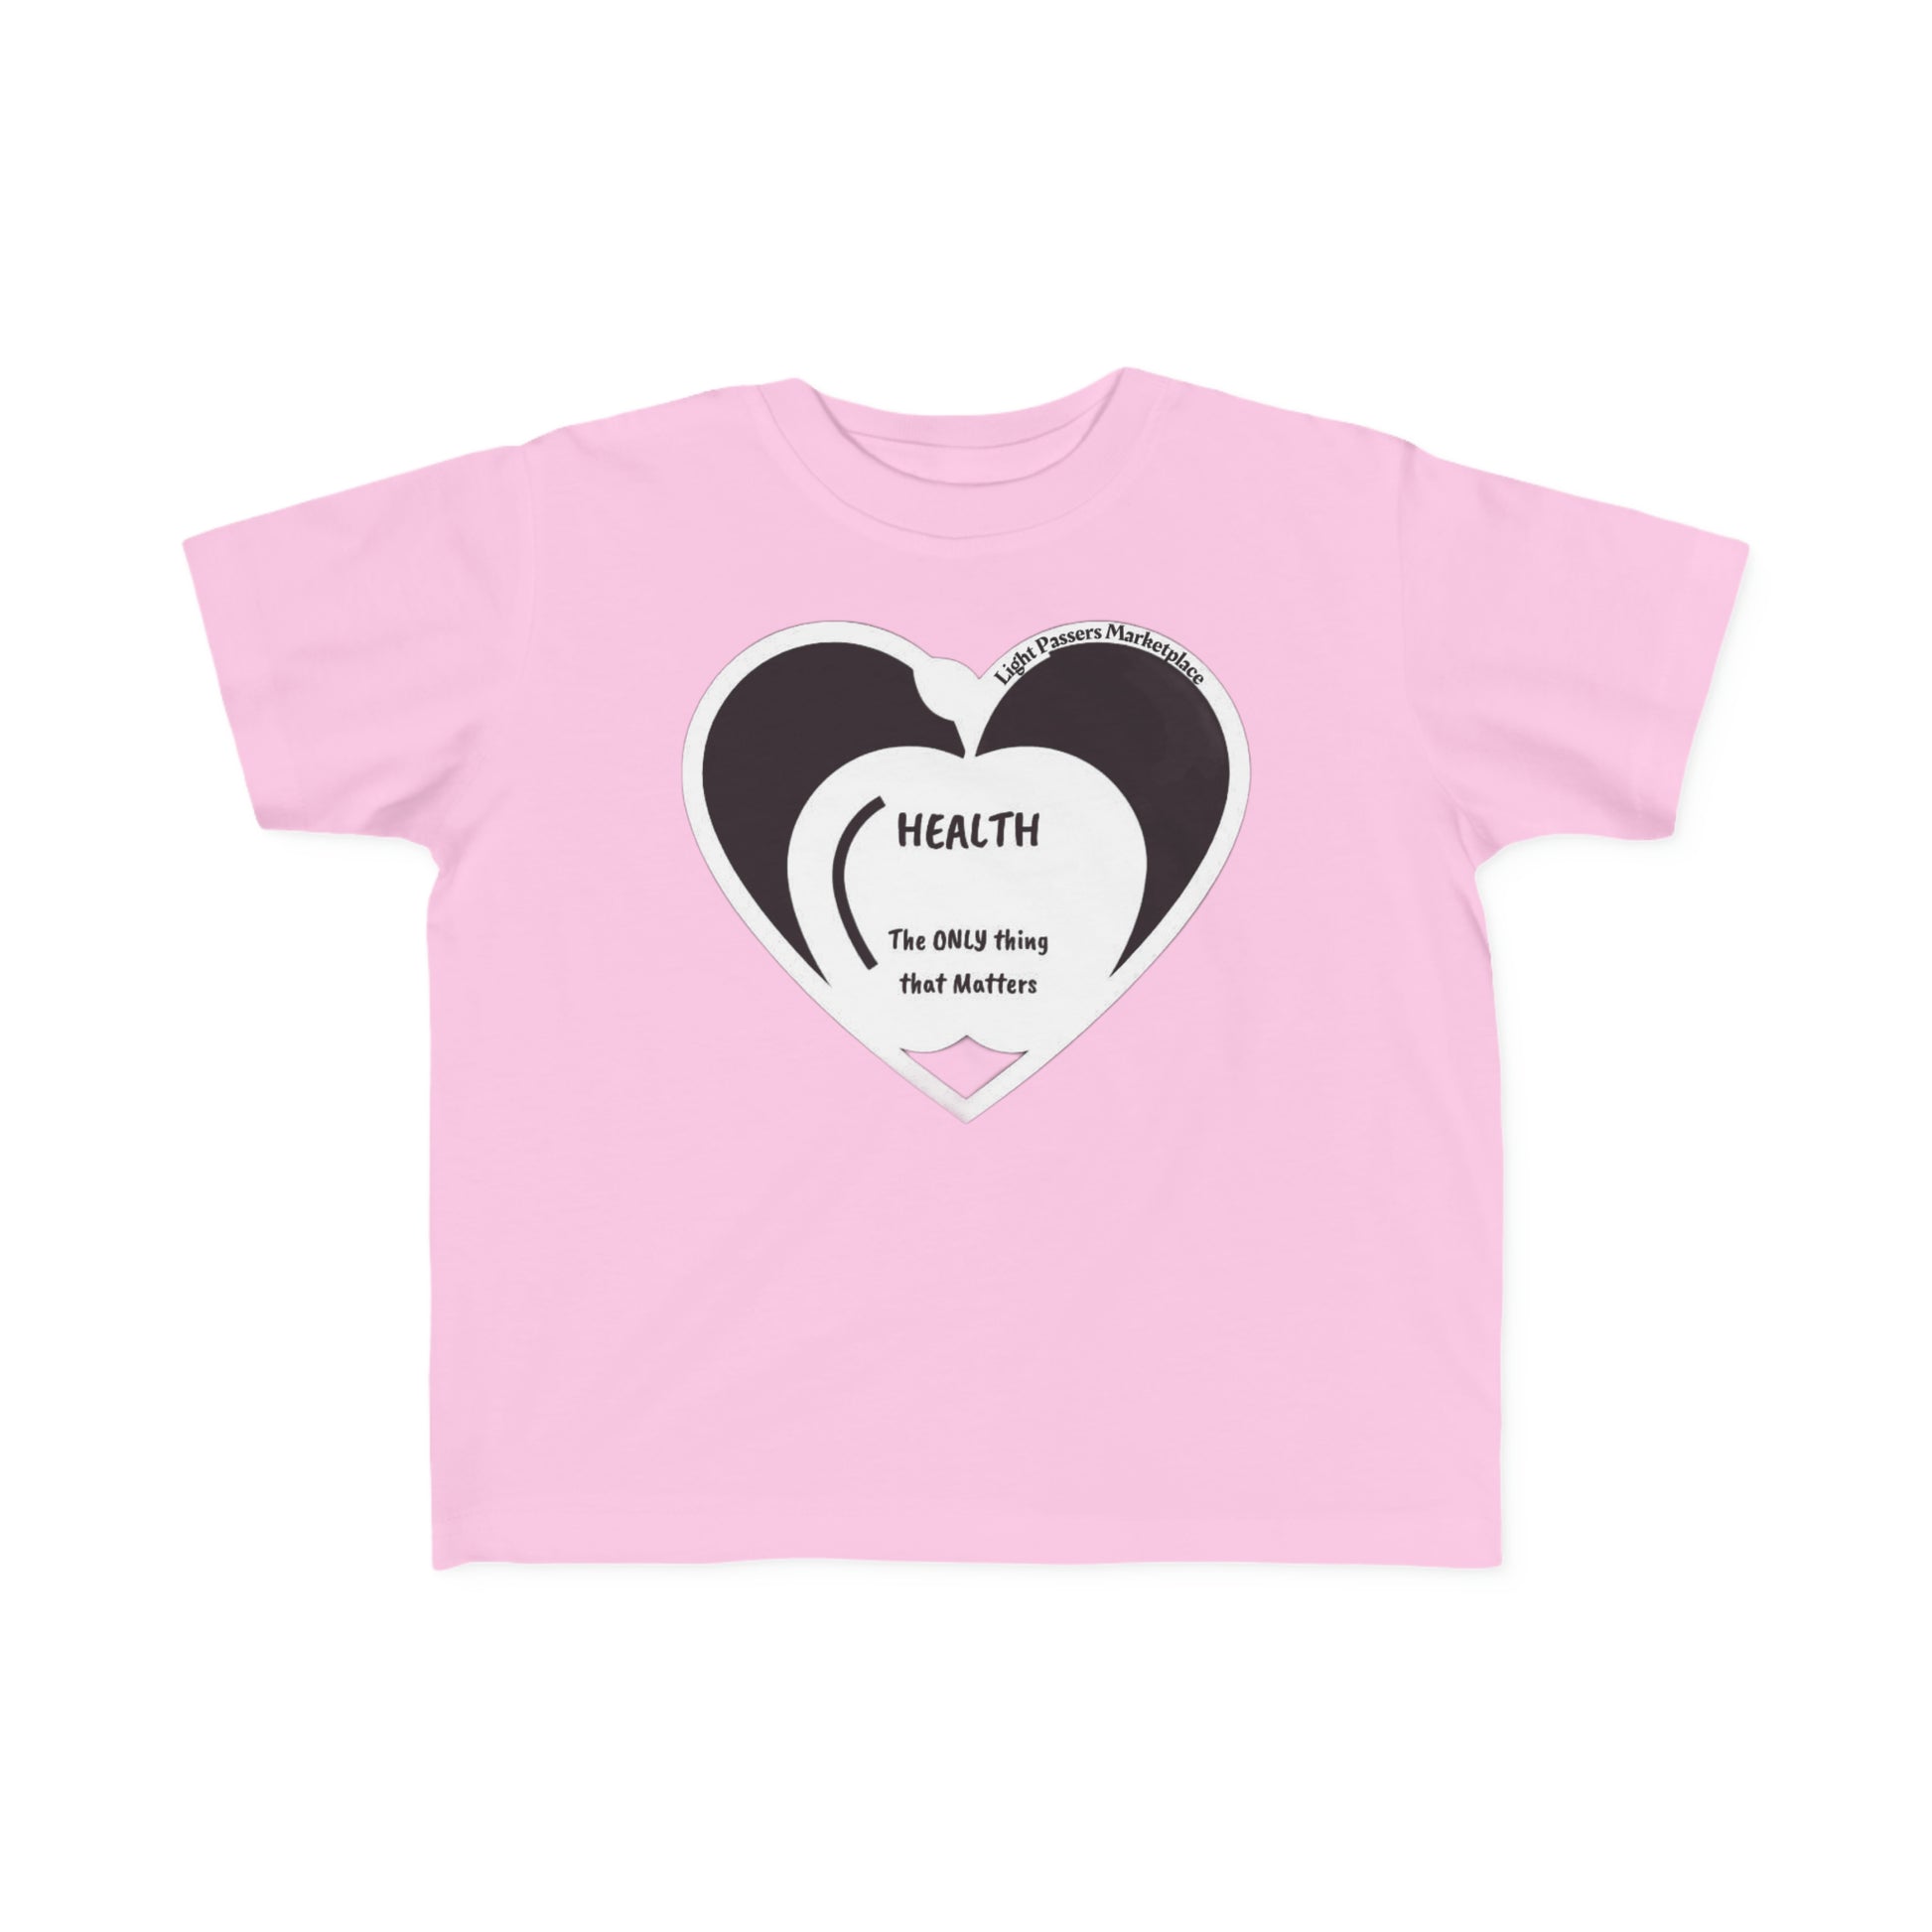 A pink toddler t-shirt with a heart and text design, made of soft 100% combed cotton for sensitive skin. Durable print, light fabric, tear-away label, classic fit, true to size.